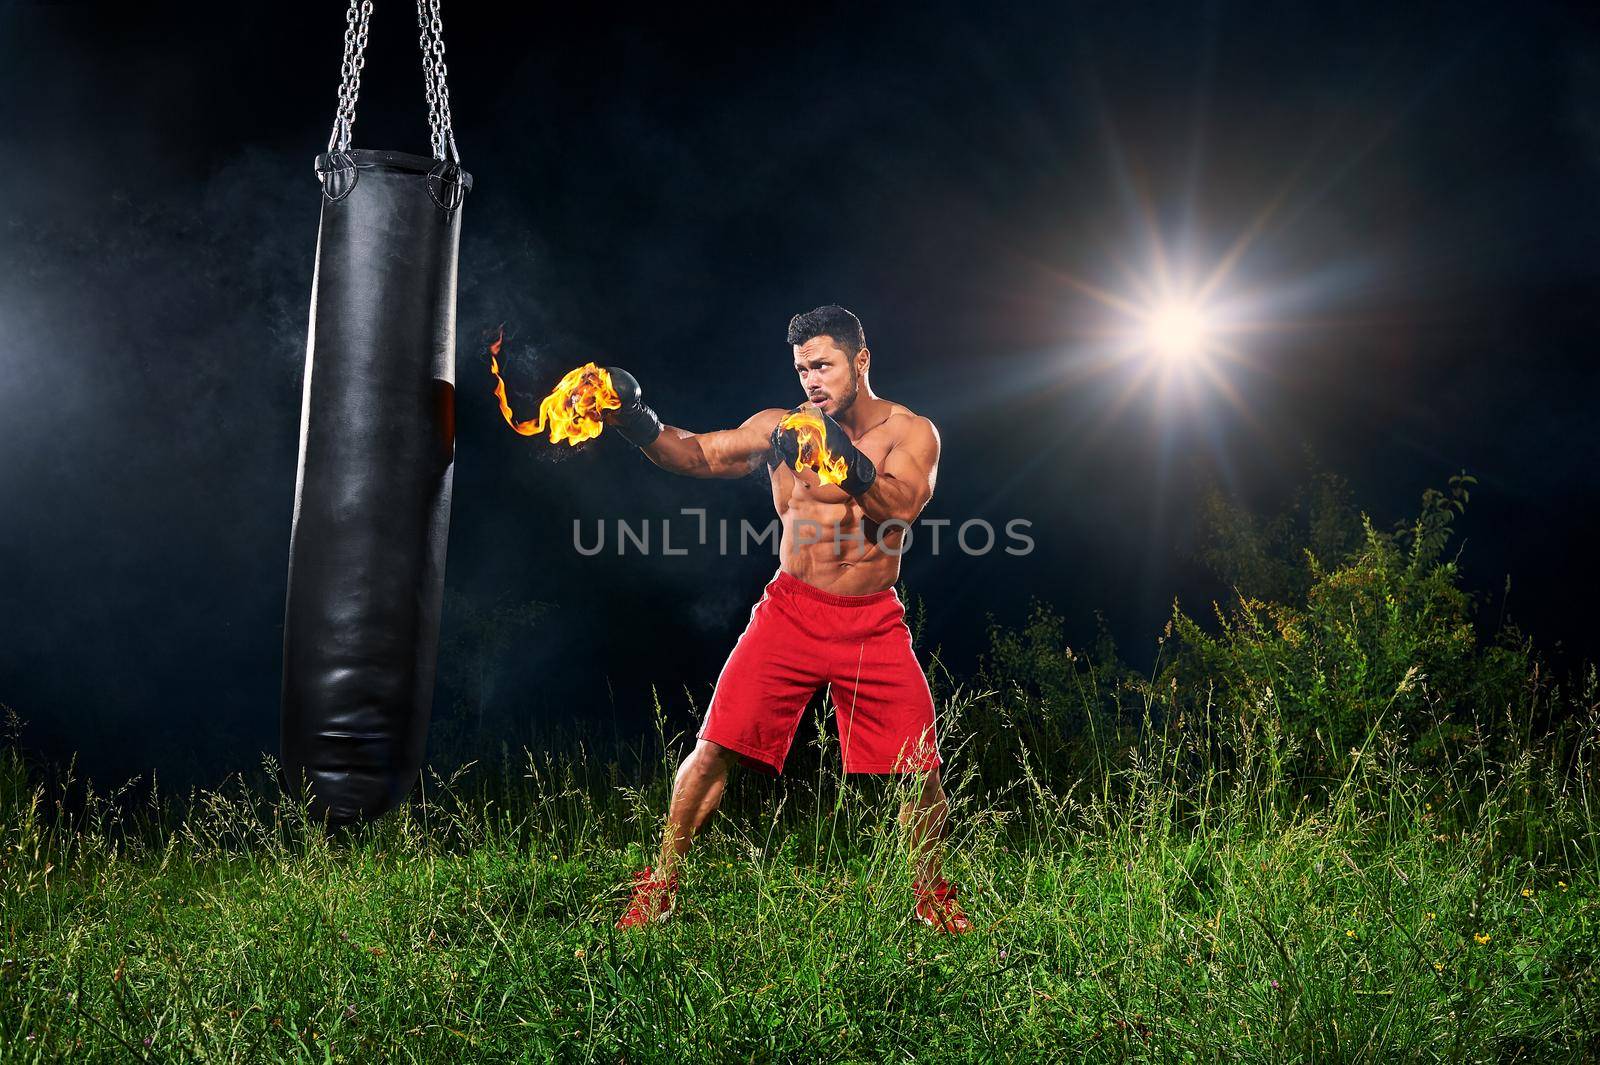 Professional boxer punching sandbag outdoors with his boxing glo by SerhiiBobyk